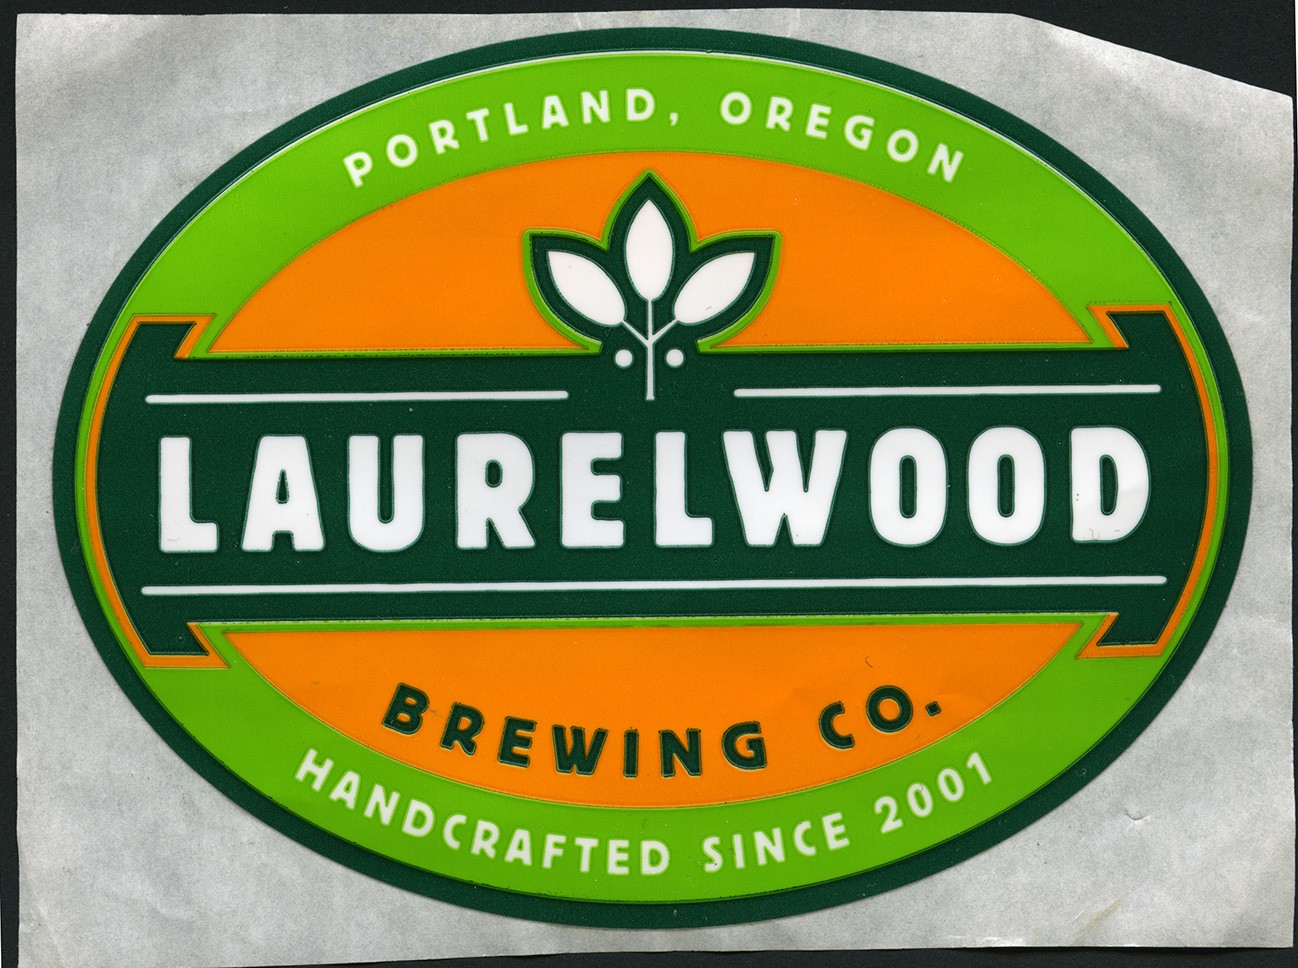 LAURELWOOD BREWING Oval Logo 4" STICKER decal craft beer brewery brewing 